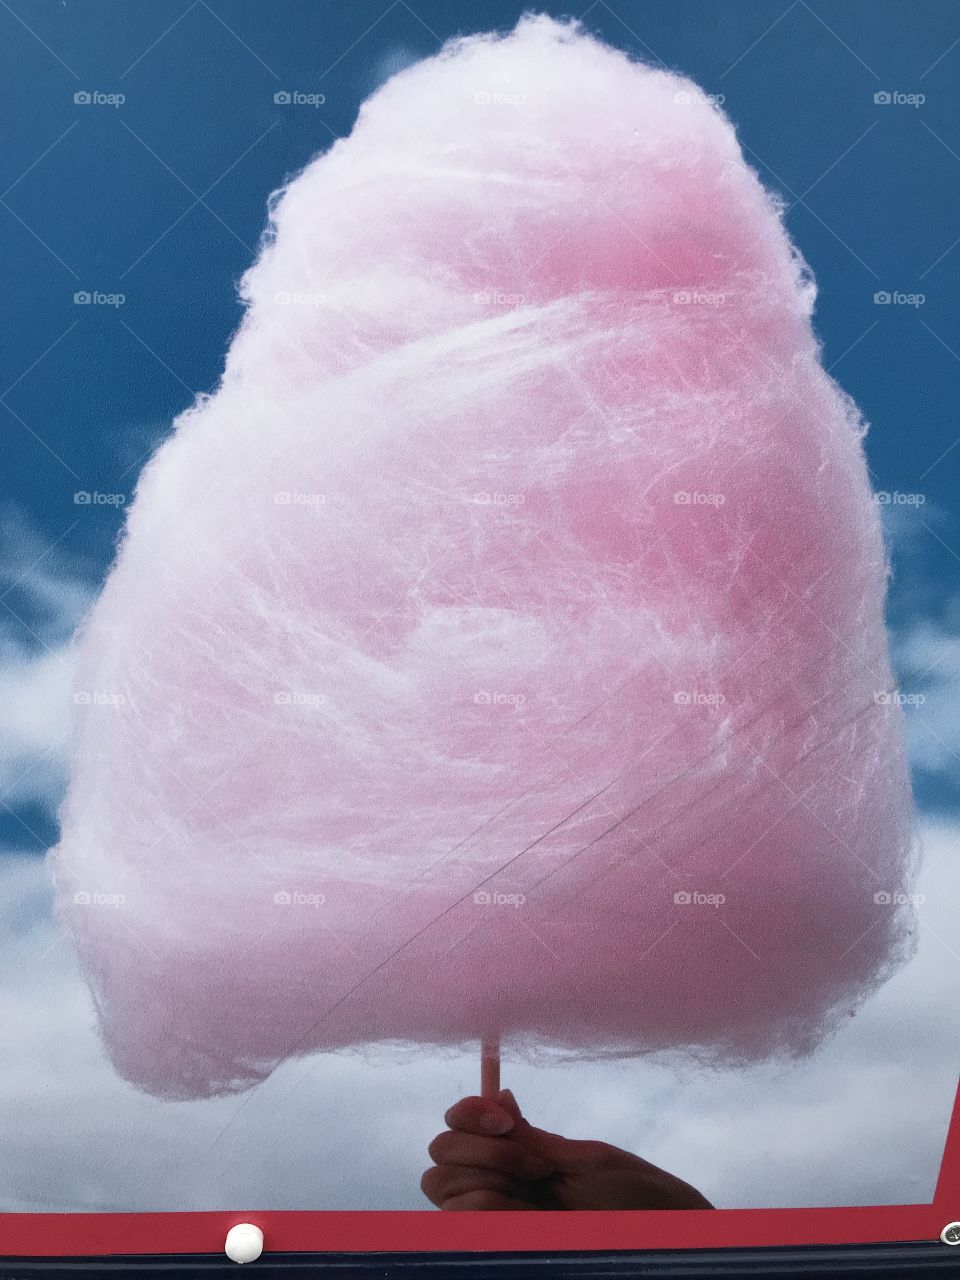 For all the fun of the fair, enjoy some Candy Floss.